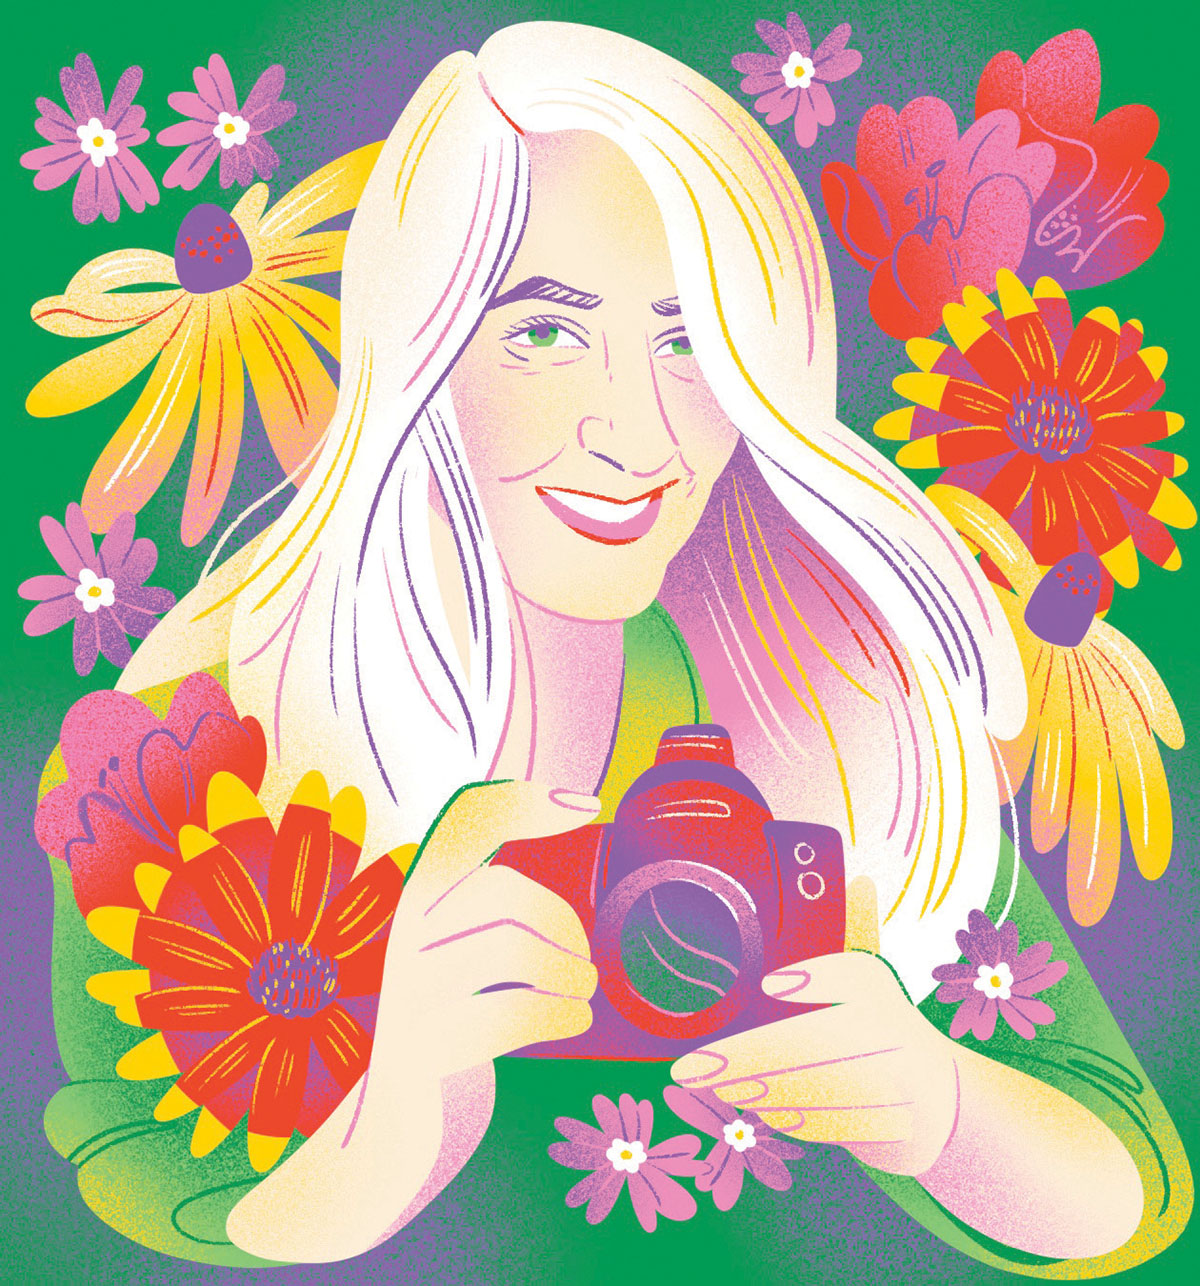 An illustration of a woman in a field of wildflowers holding a camera